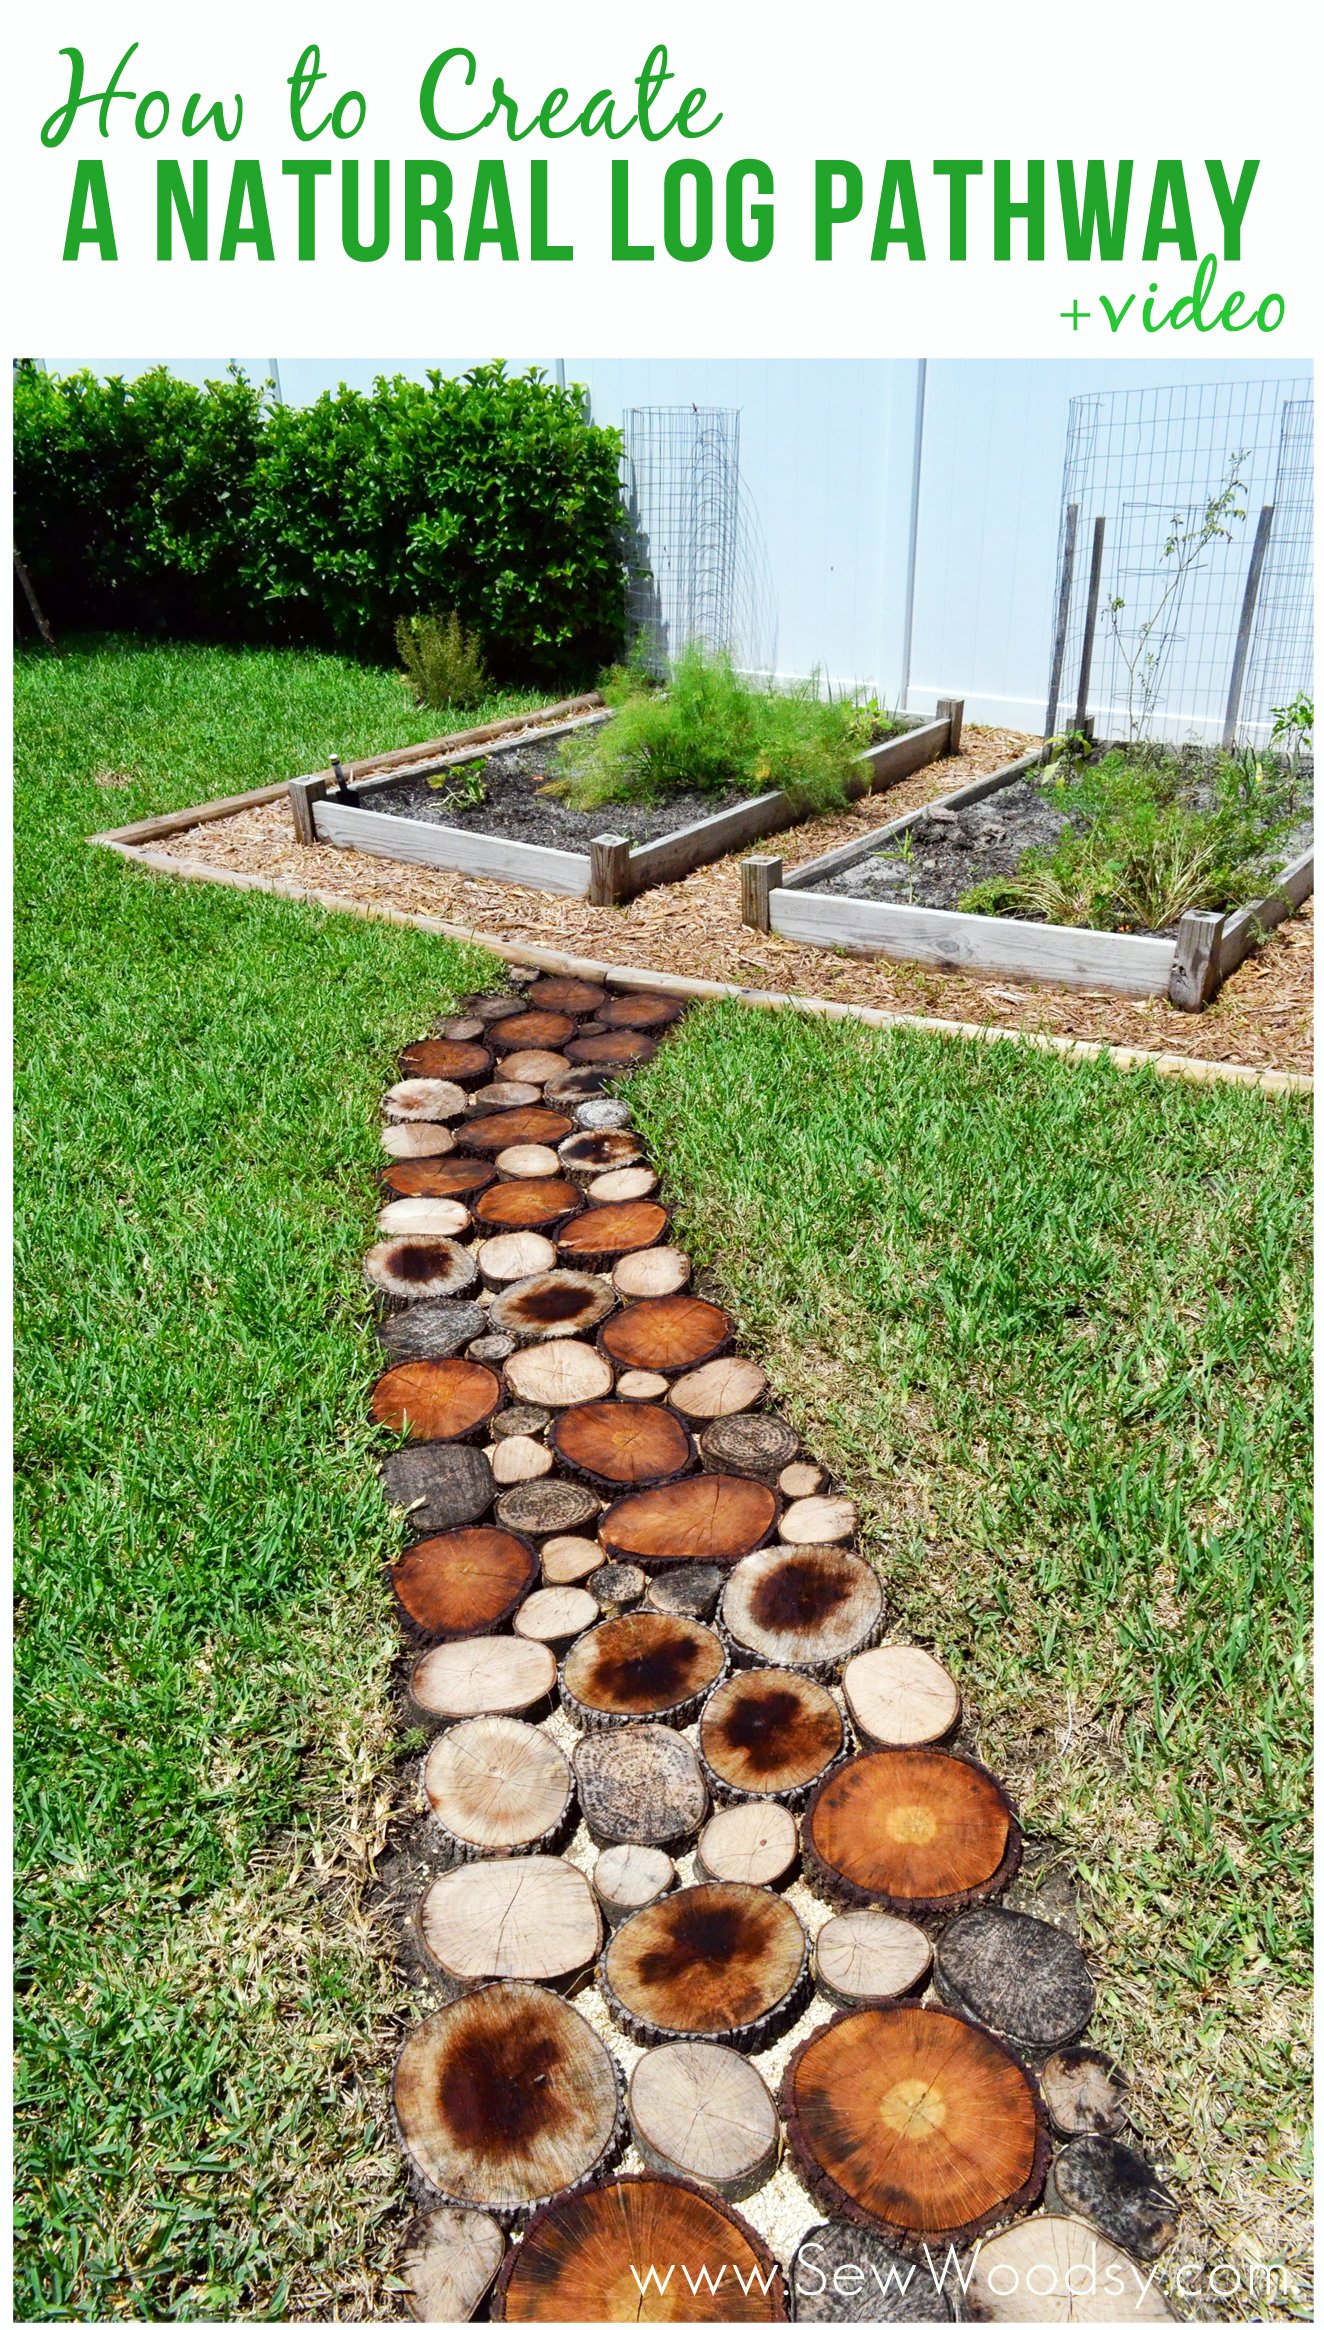 How to Create a Natural Log Pathway + Video via SewWoodsy.com